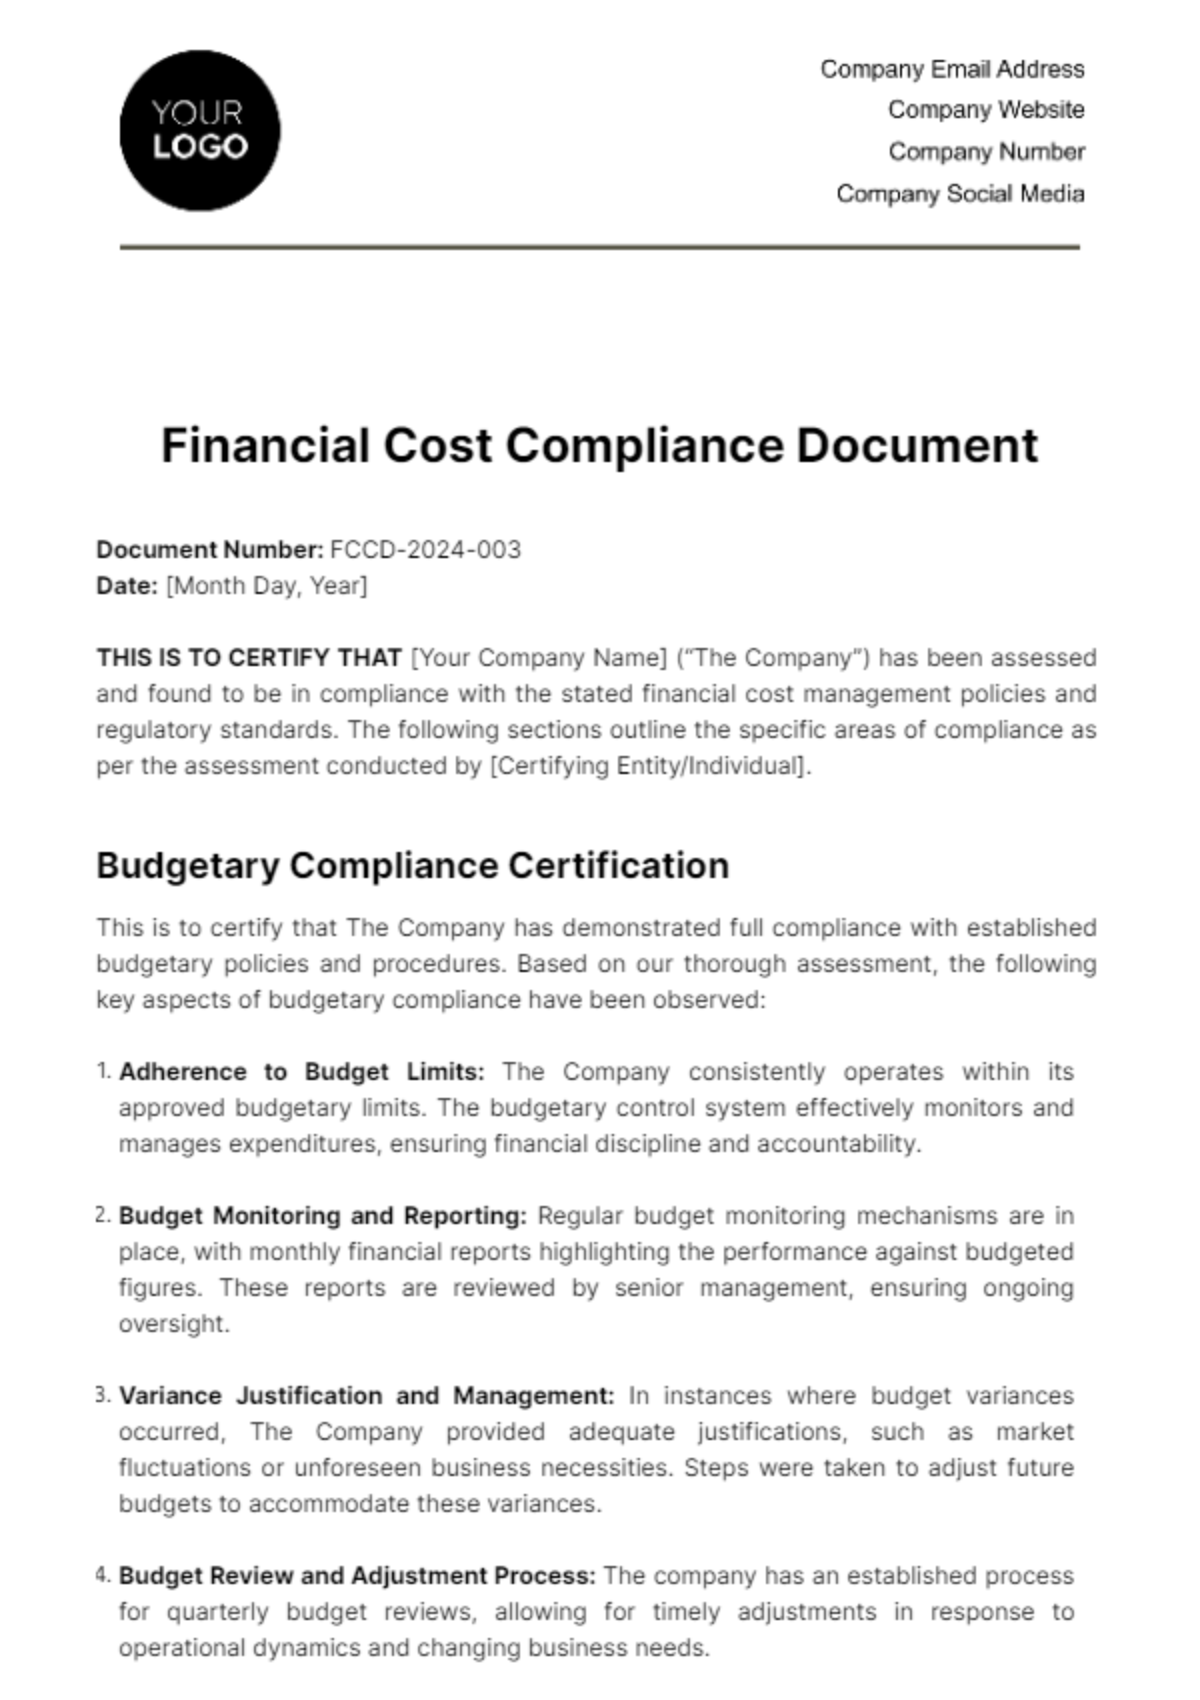 Financial Cost Compliance Document Template